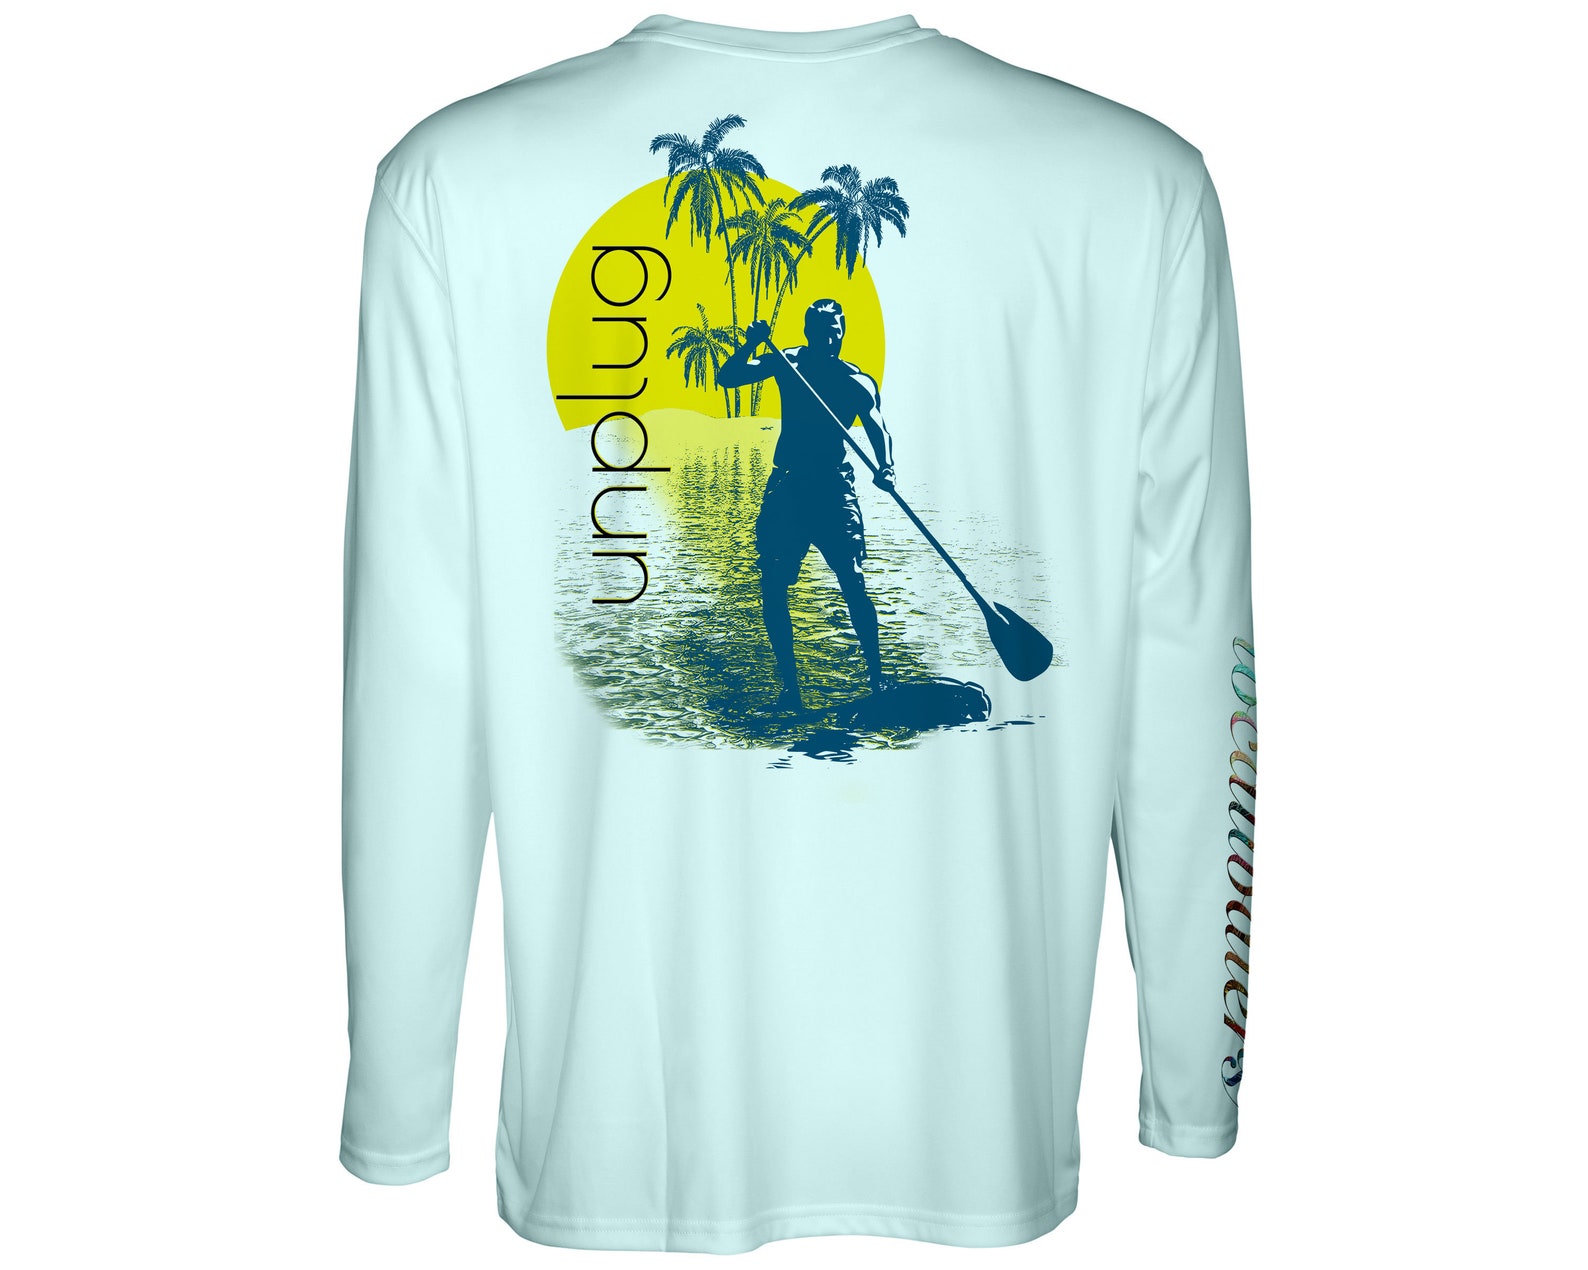 Paddle Boarding T-shirt Stand up Paddle Board Apparel - Etsy